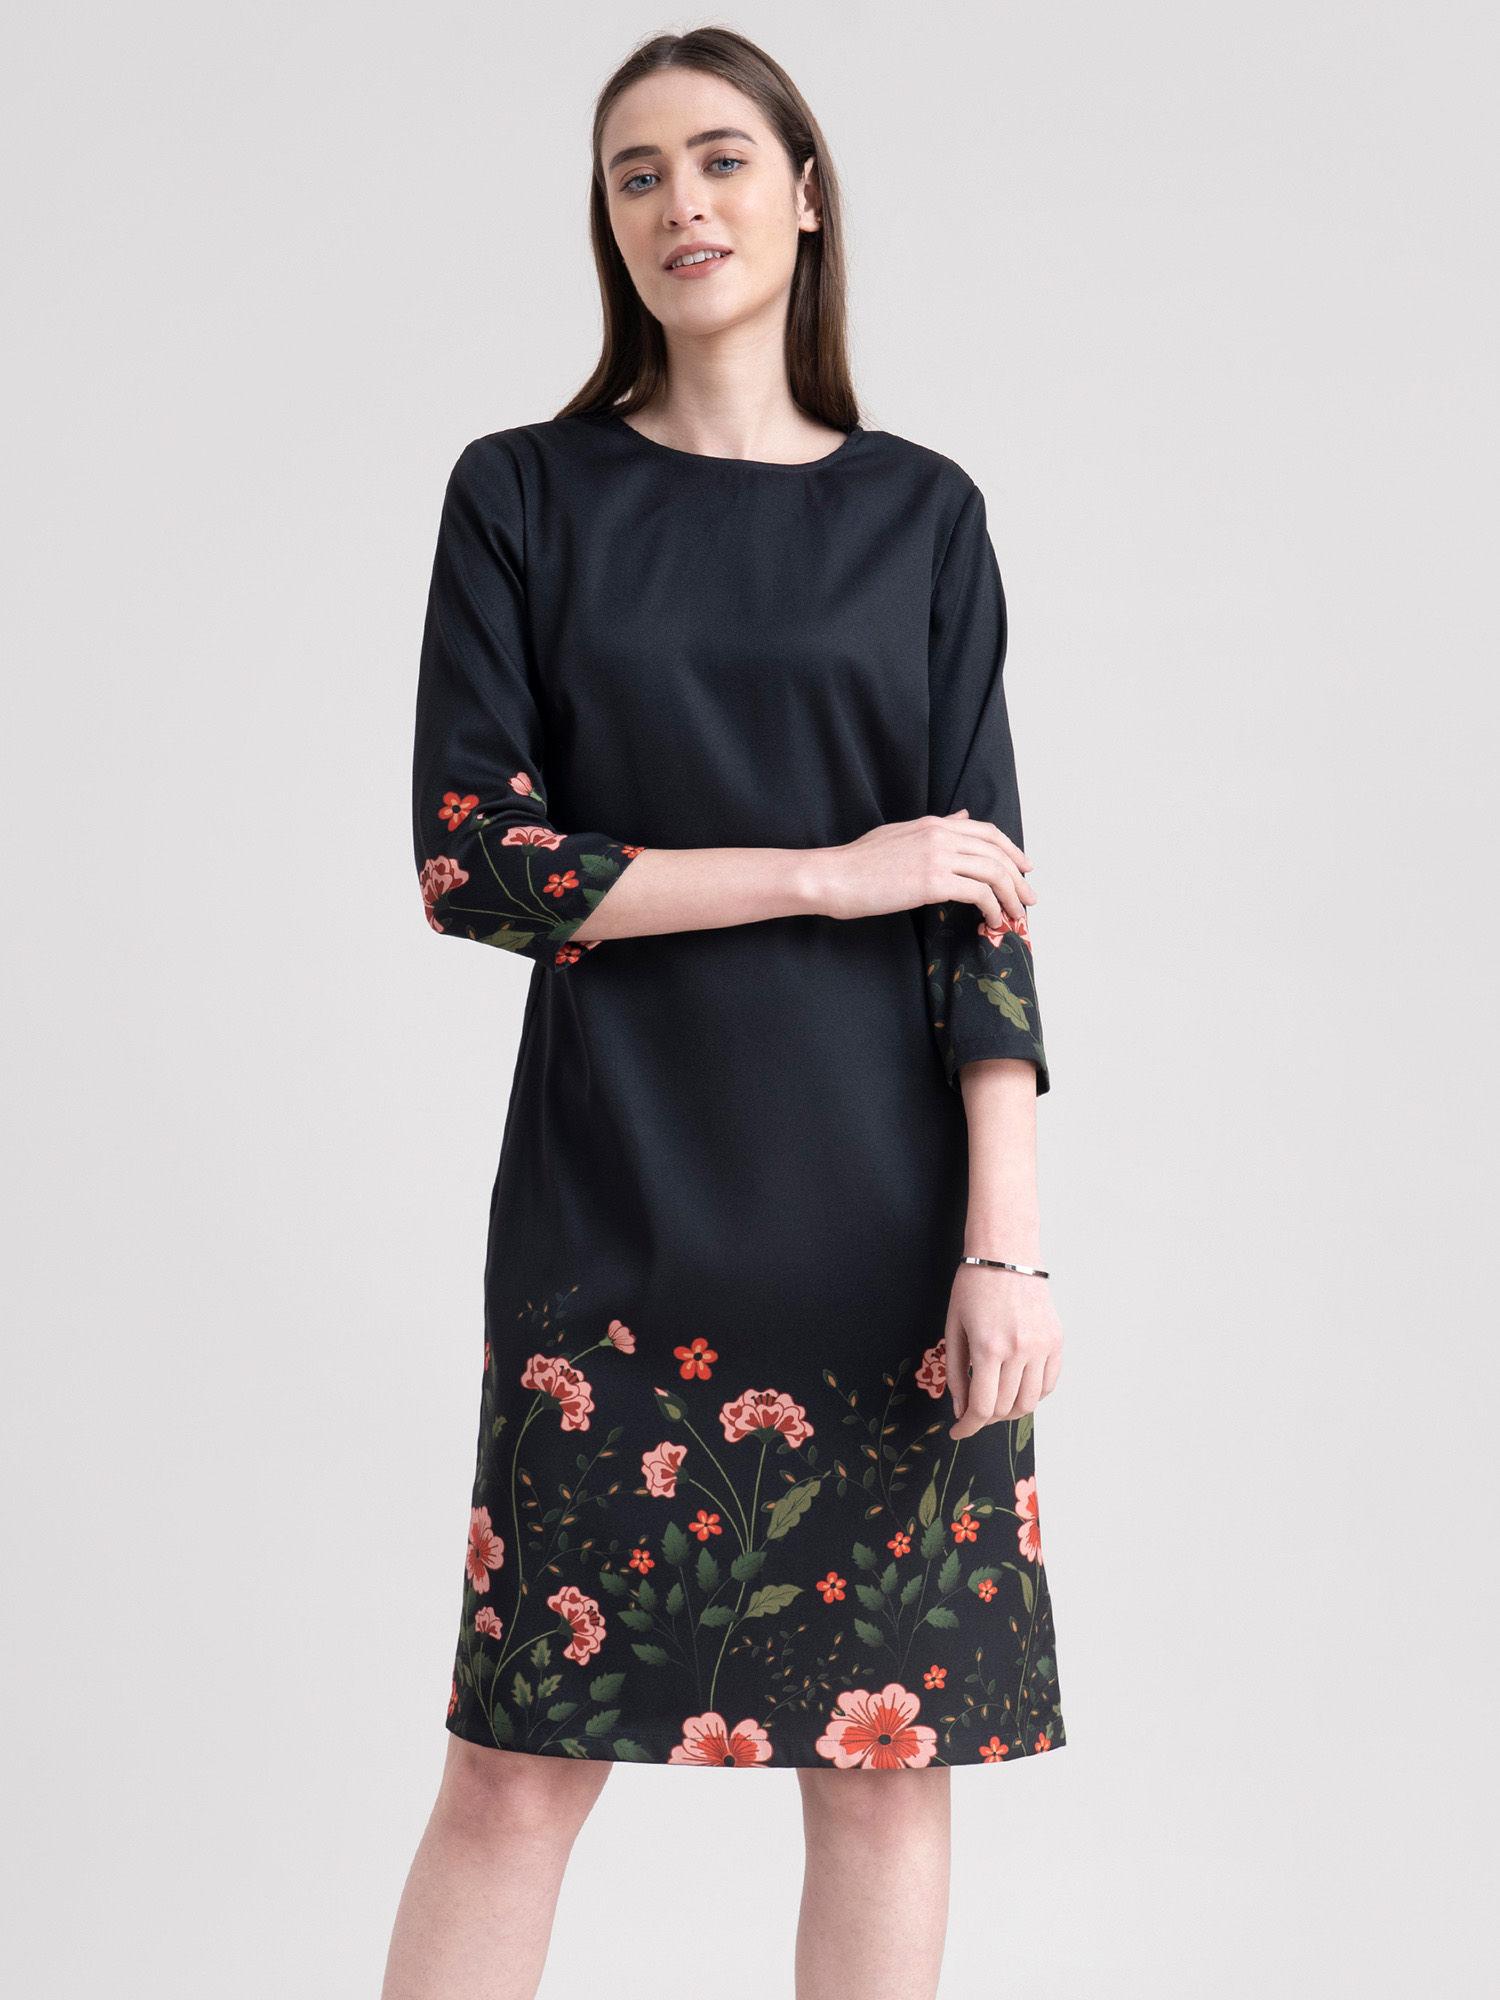 round-neck-floral-print-shift-dress-black-and-green